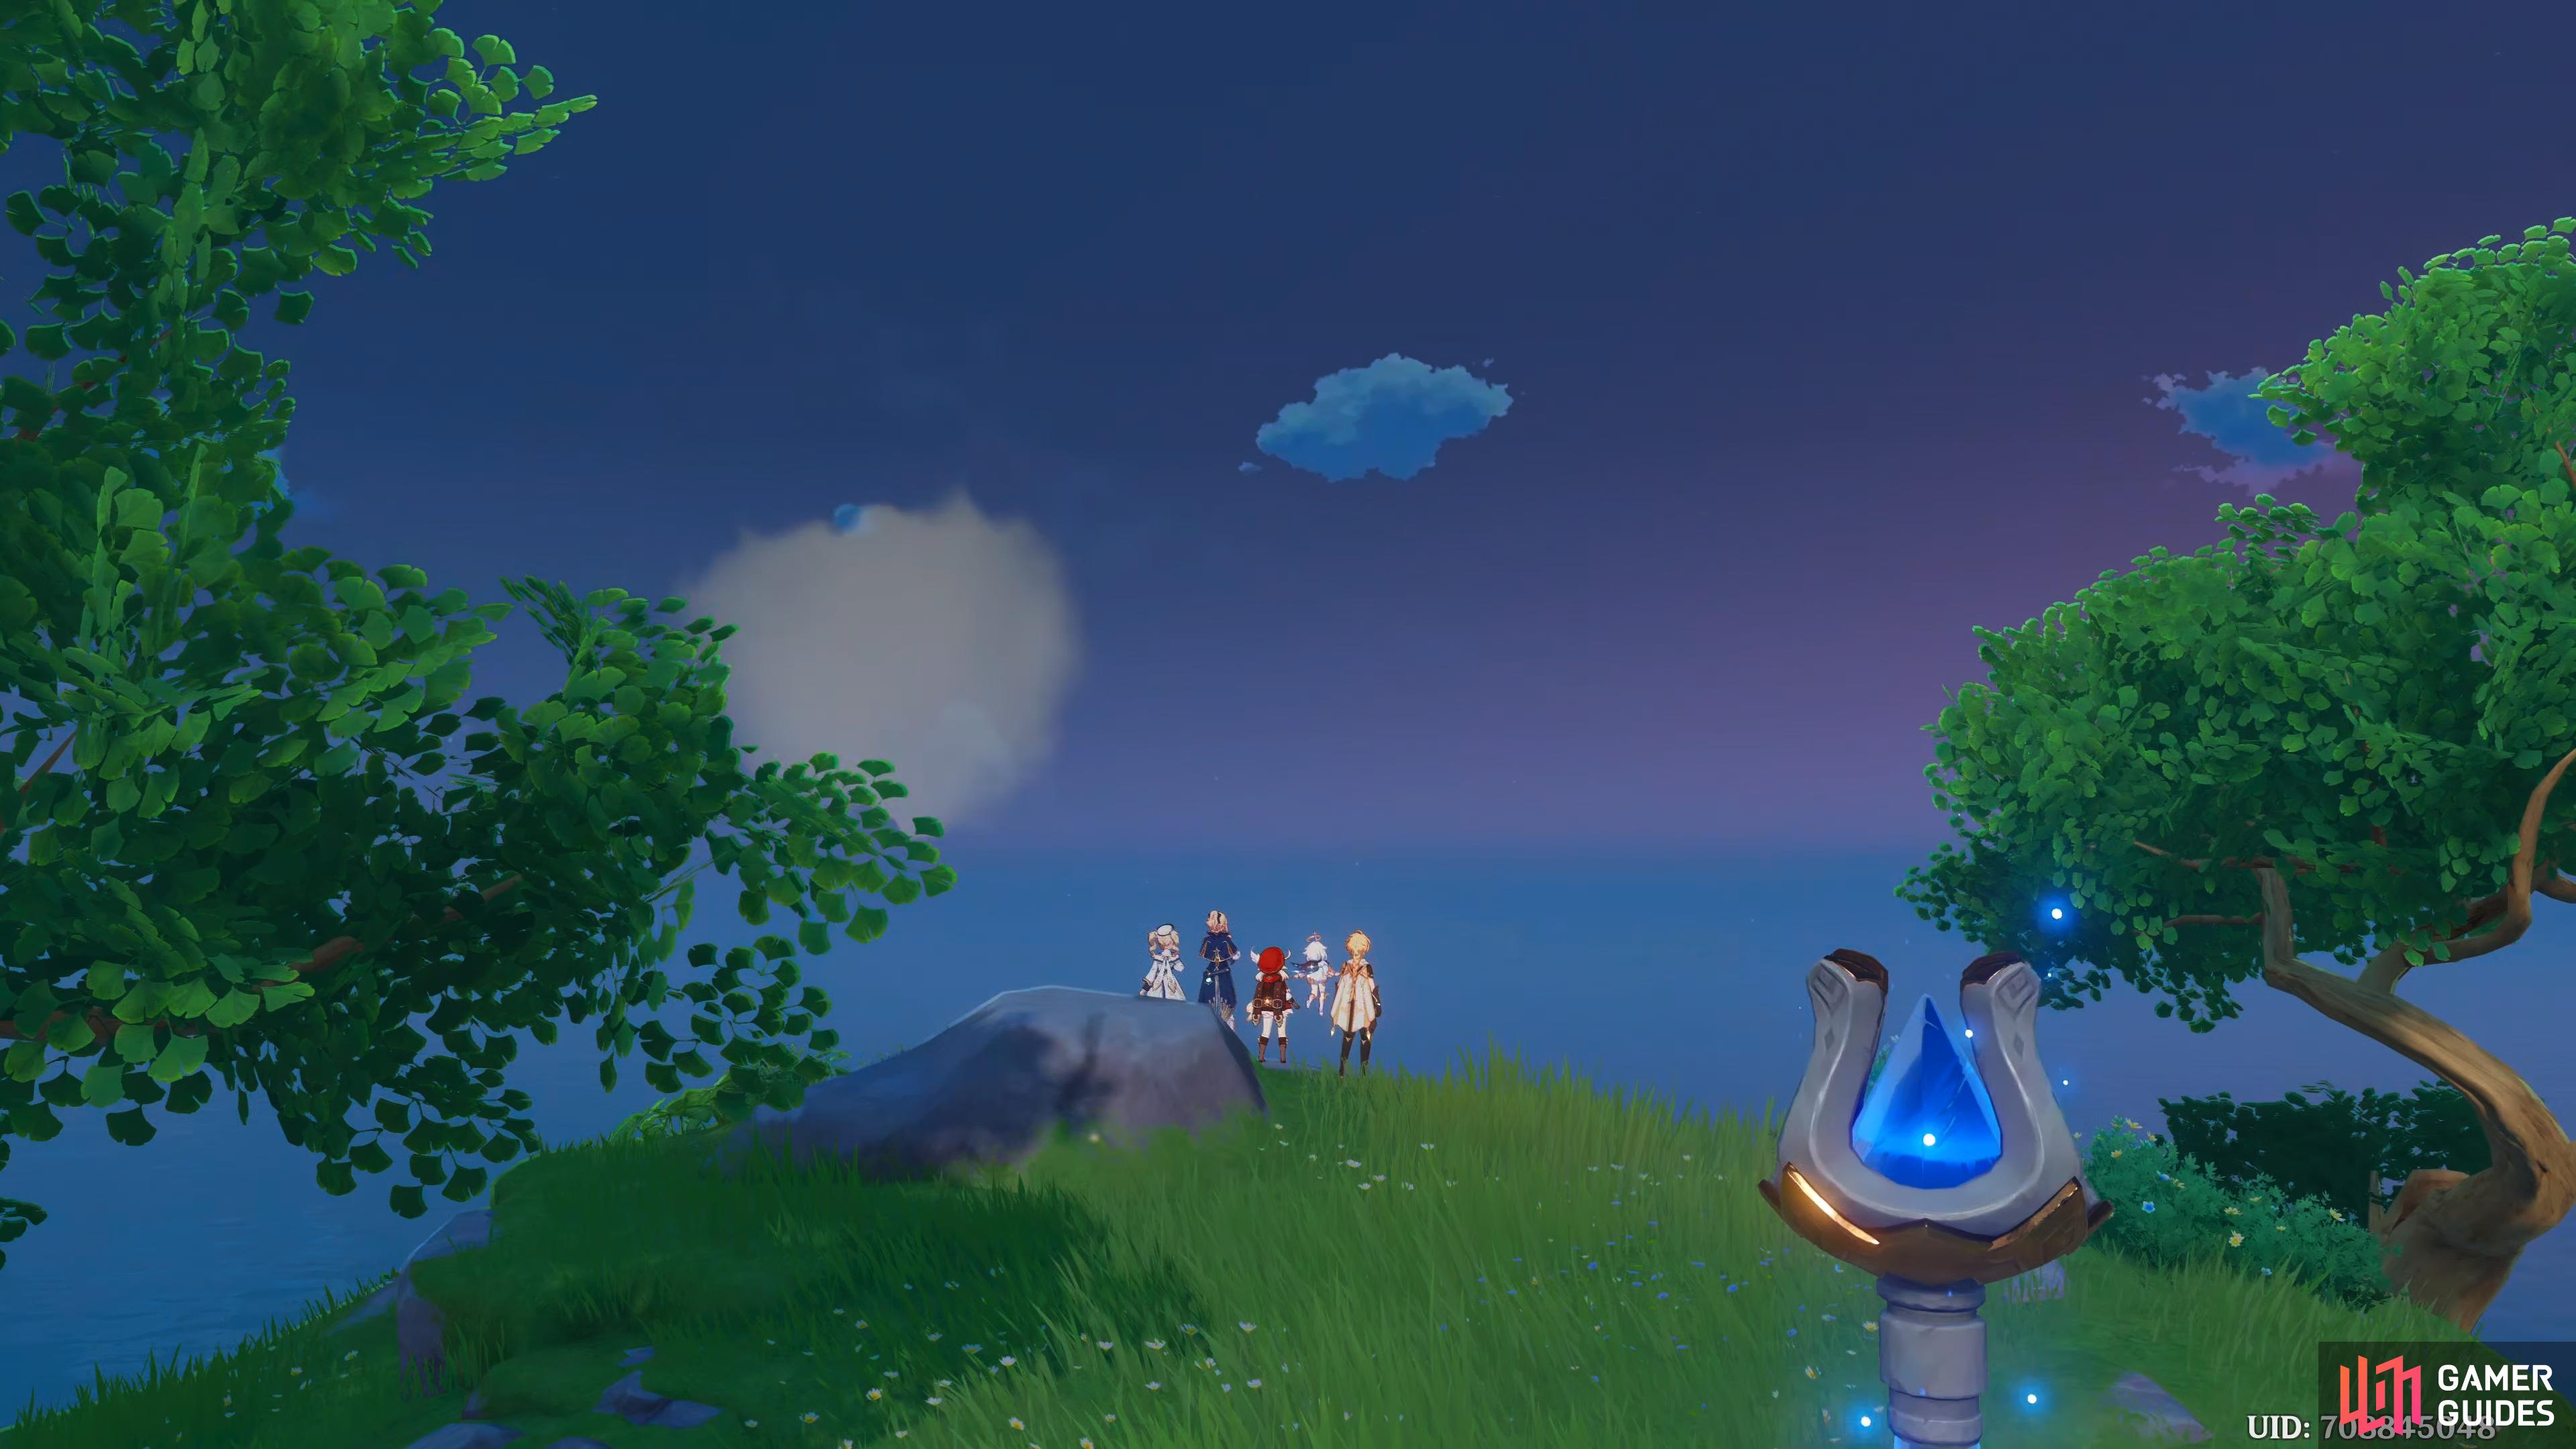 The Traveler and friends enjoying the view in the Golden Apple Archipelago.